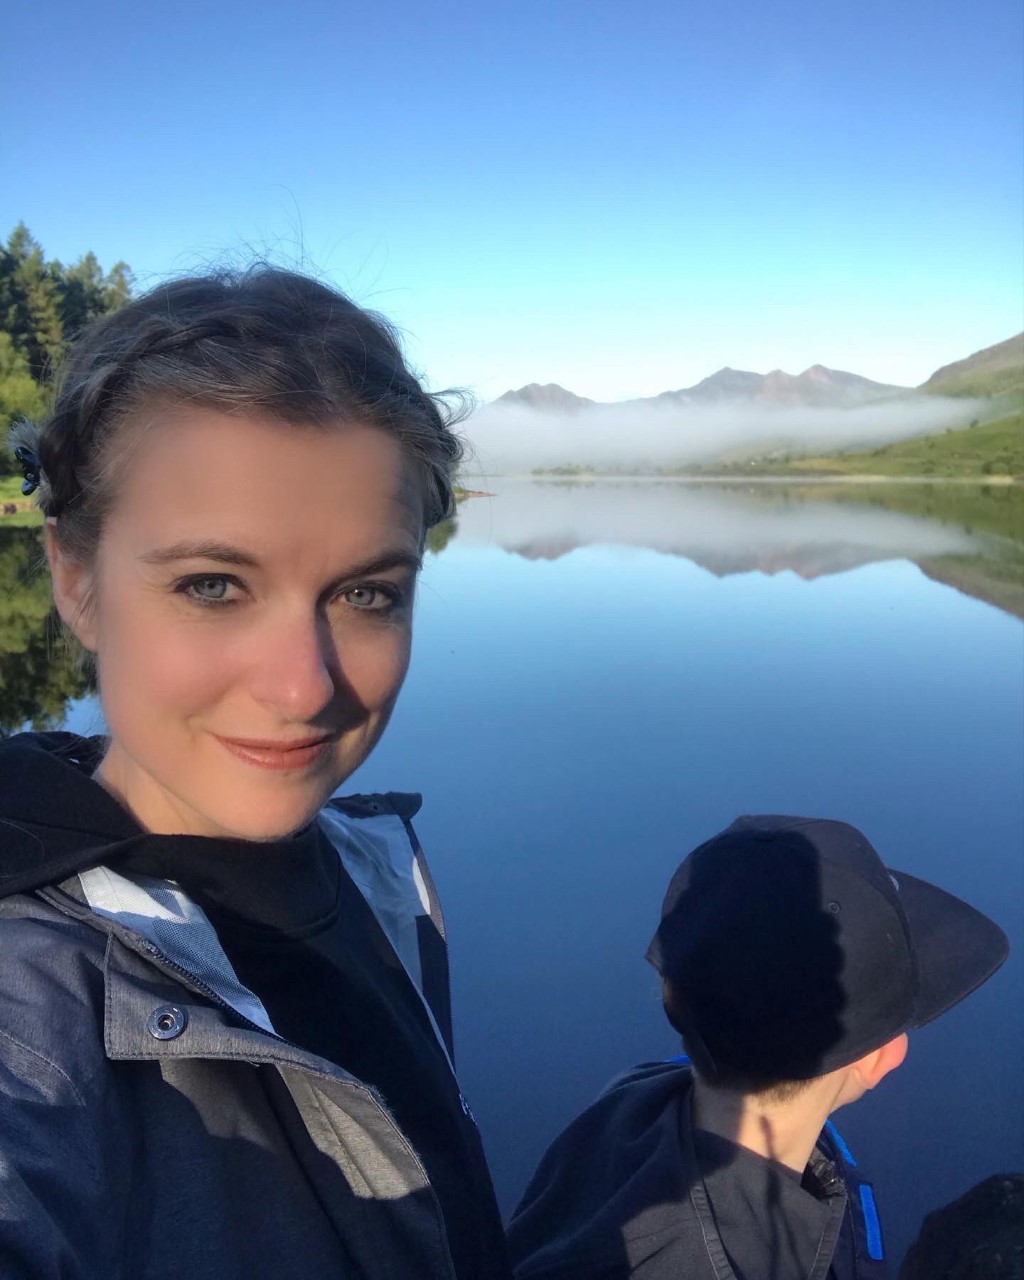 Lucy Cox stands by a lake with mountains in the background.